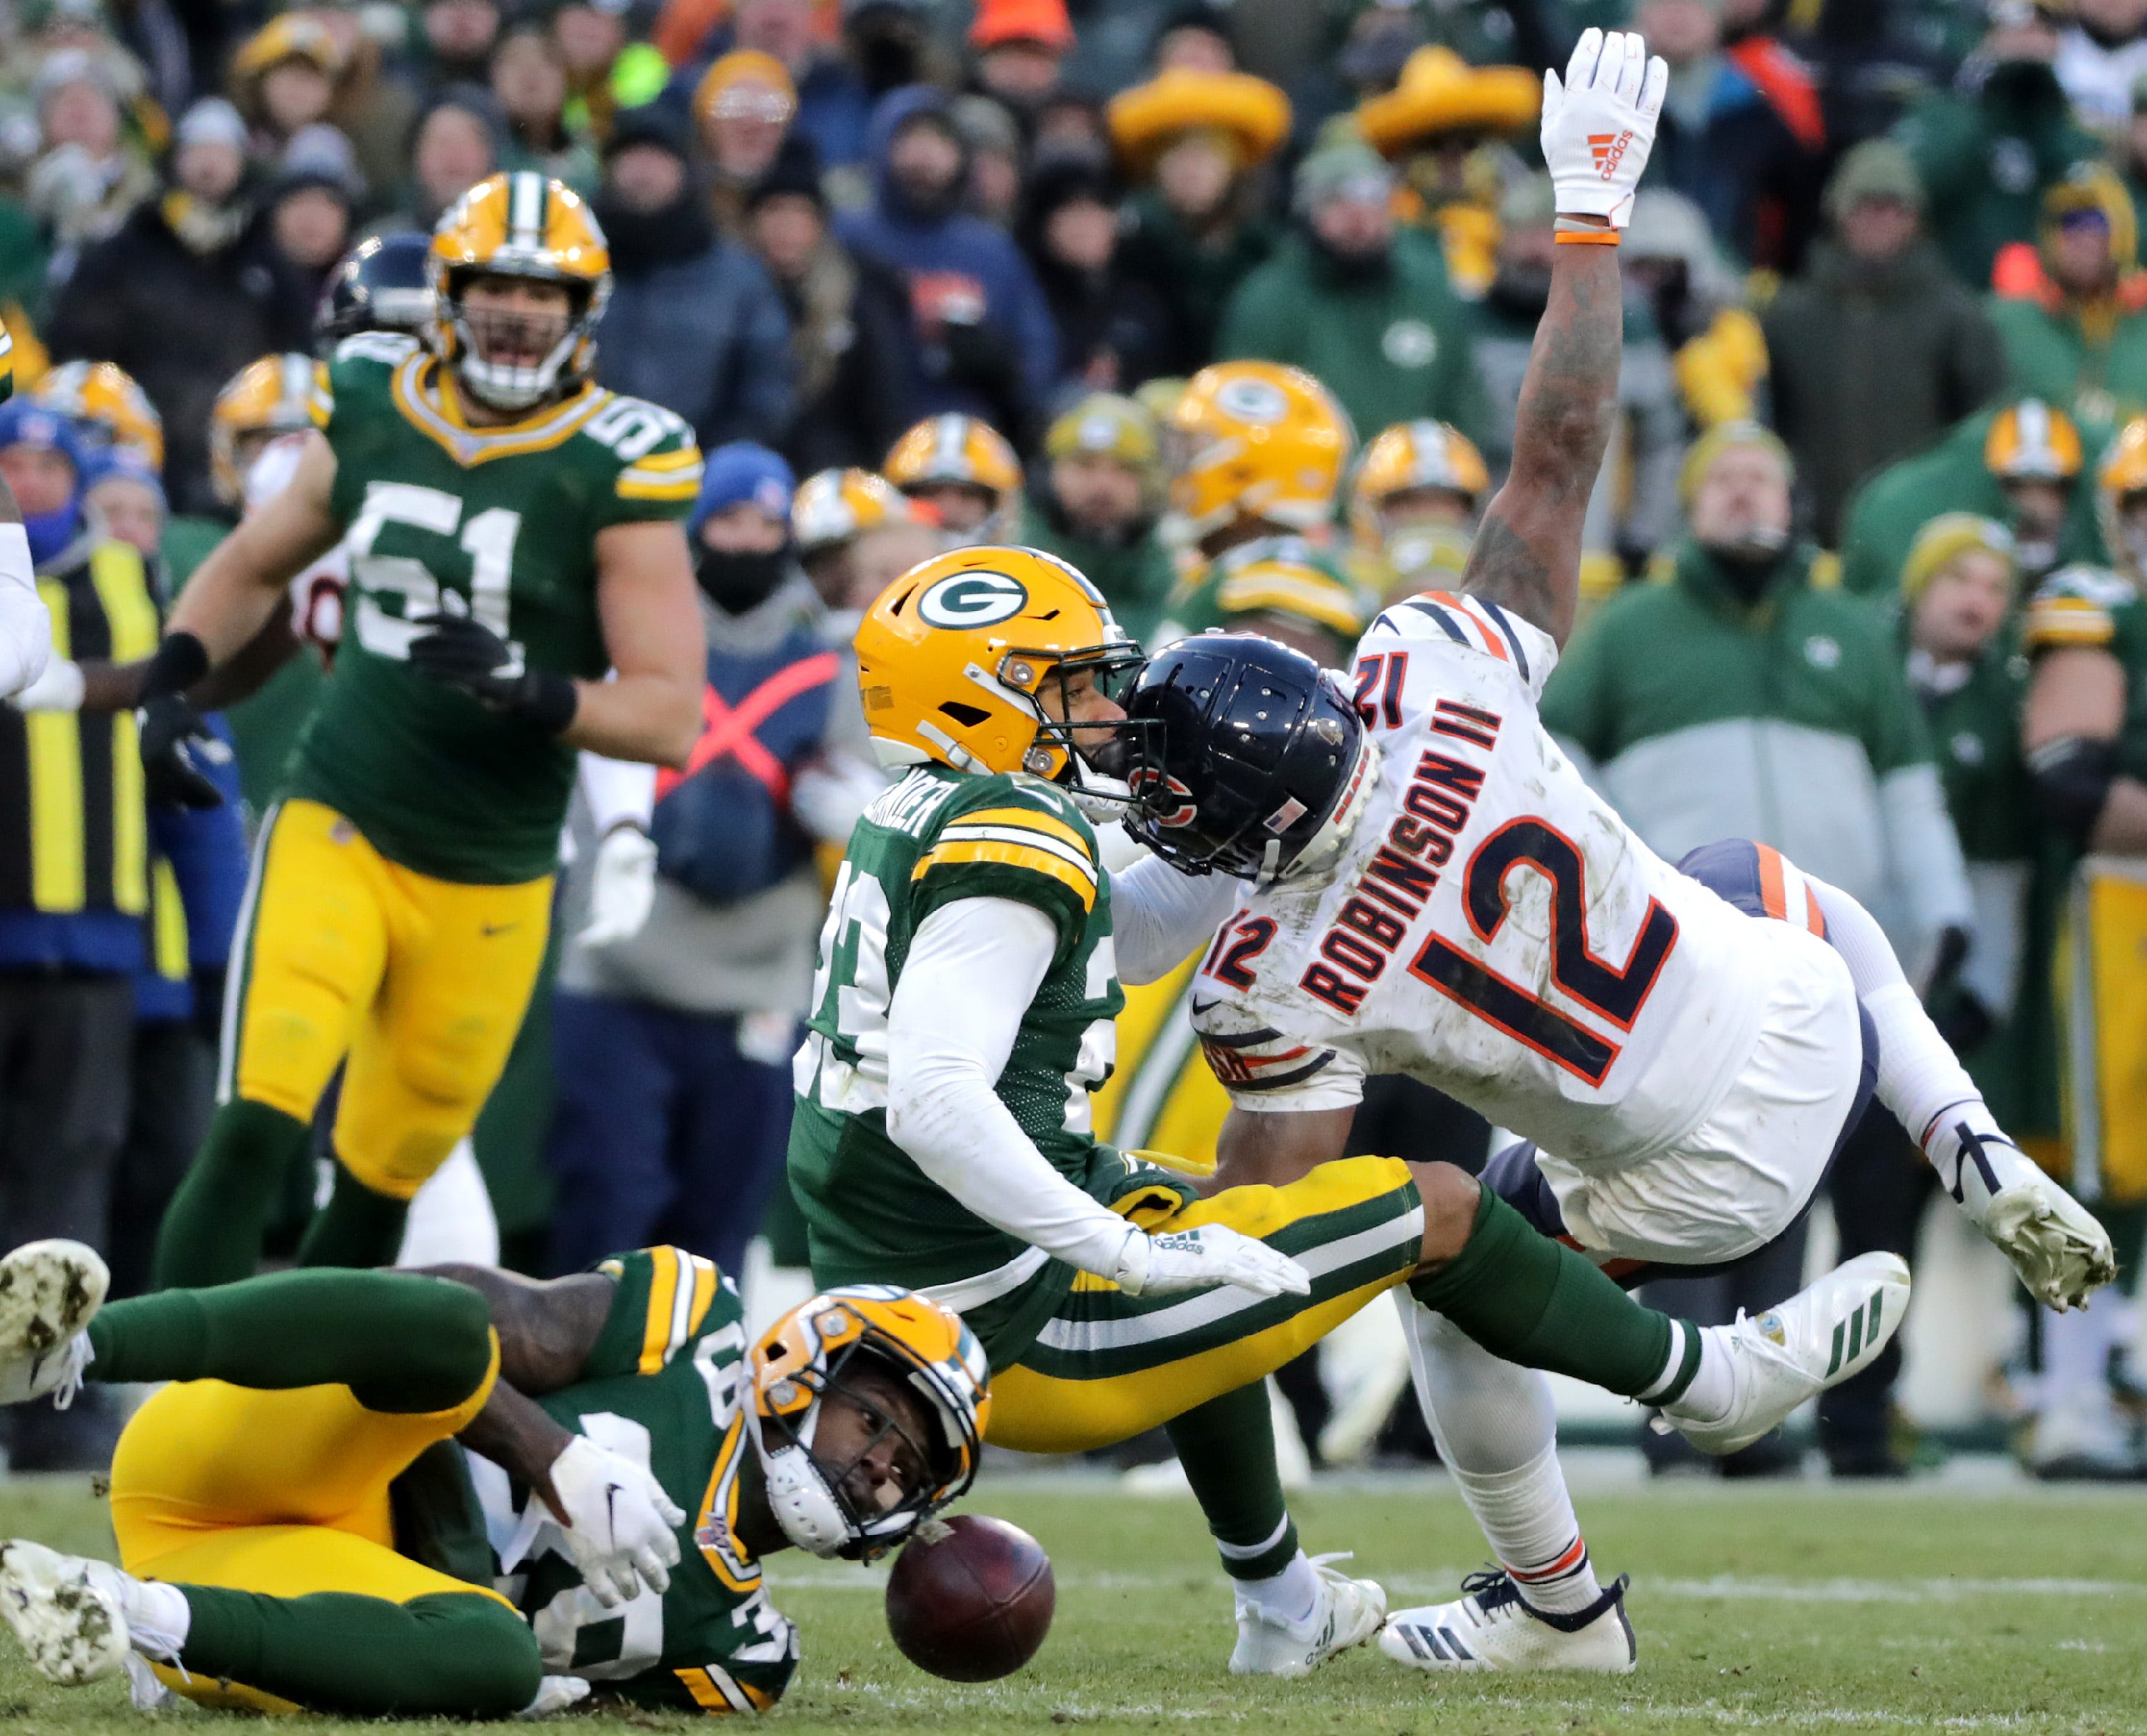 Green Bay Packers cornerback Jaire Alexander (23) and defensive back Chandon Sullivan (39) break up a a pass intended for Chicago Bears wide receiver Allen Robinson (12) on the final drive during their football game on Sunday, December 15, 2019, at Lambeau Field in Green Bay, Wis.